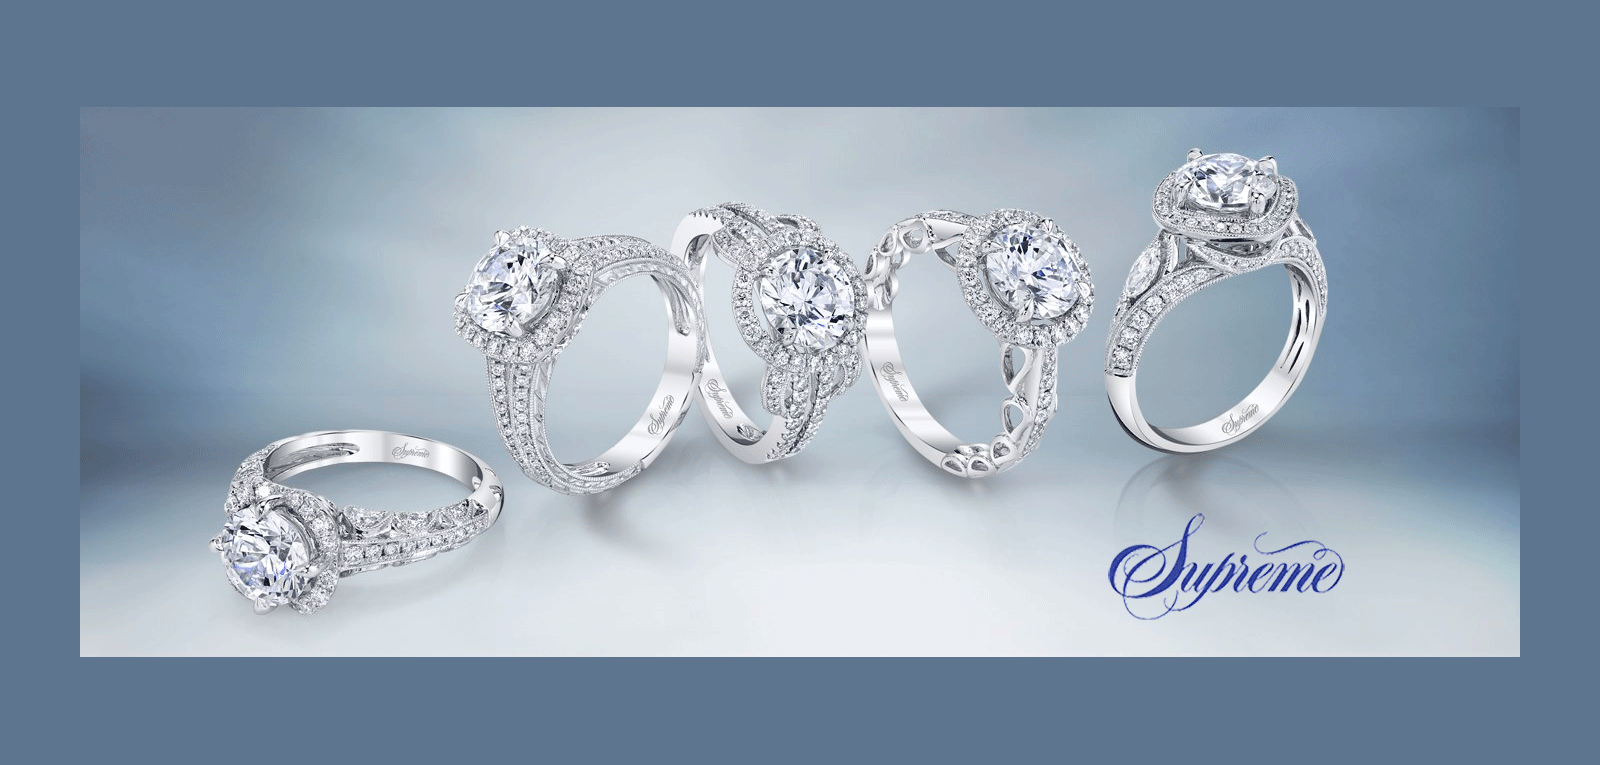 Supreme Jewelry Engagement Rings